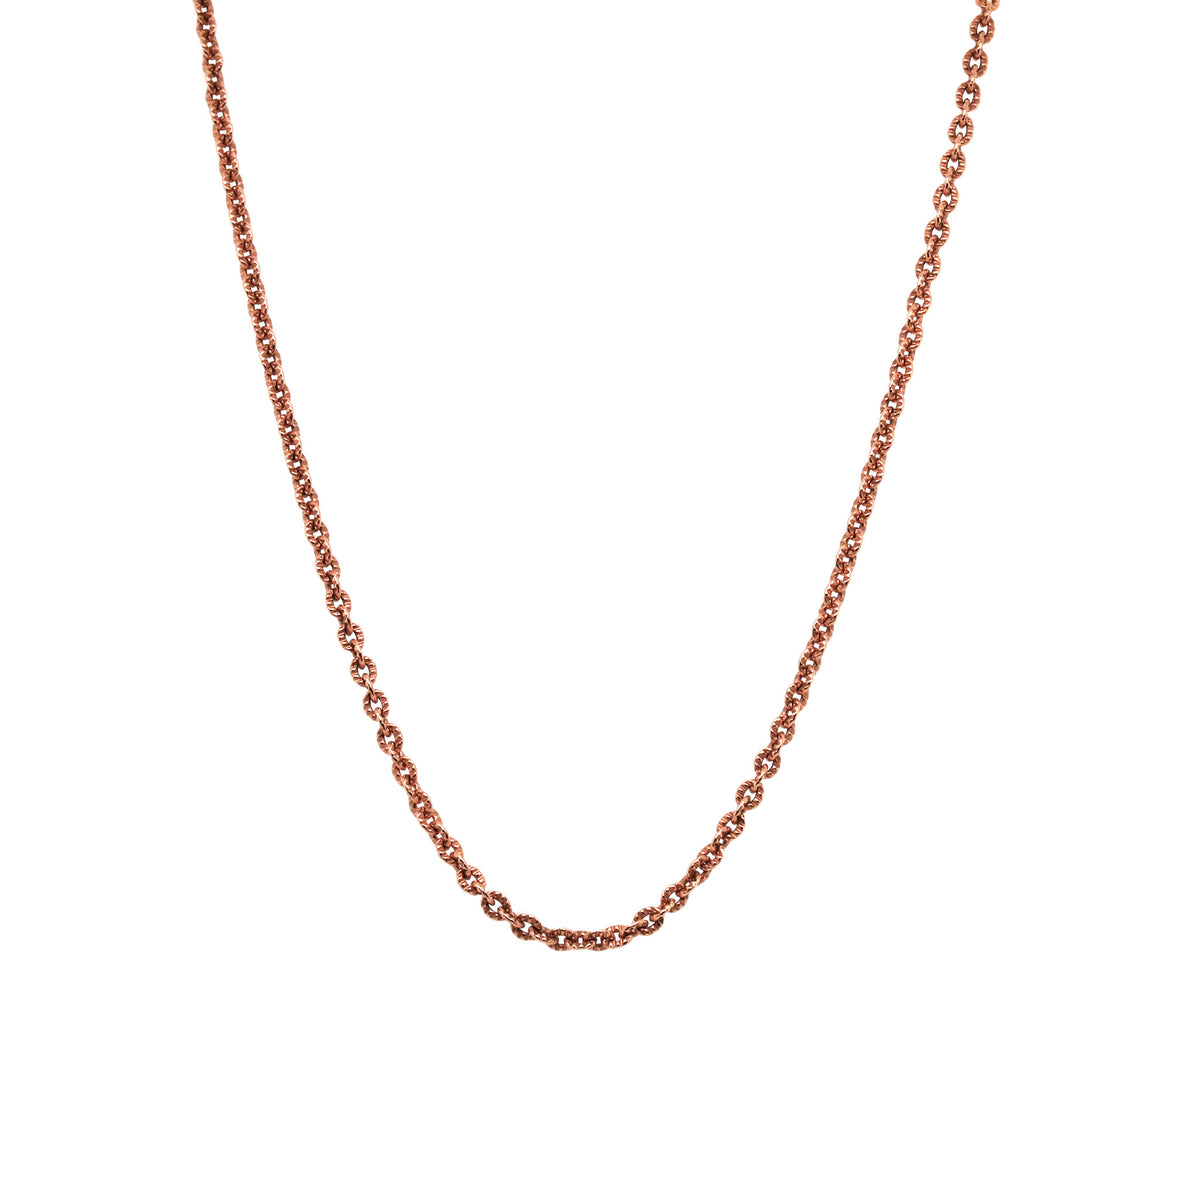 Fancy Ridged Rose Gold Cable Chain